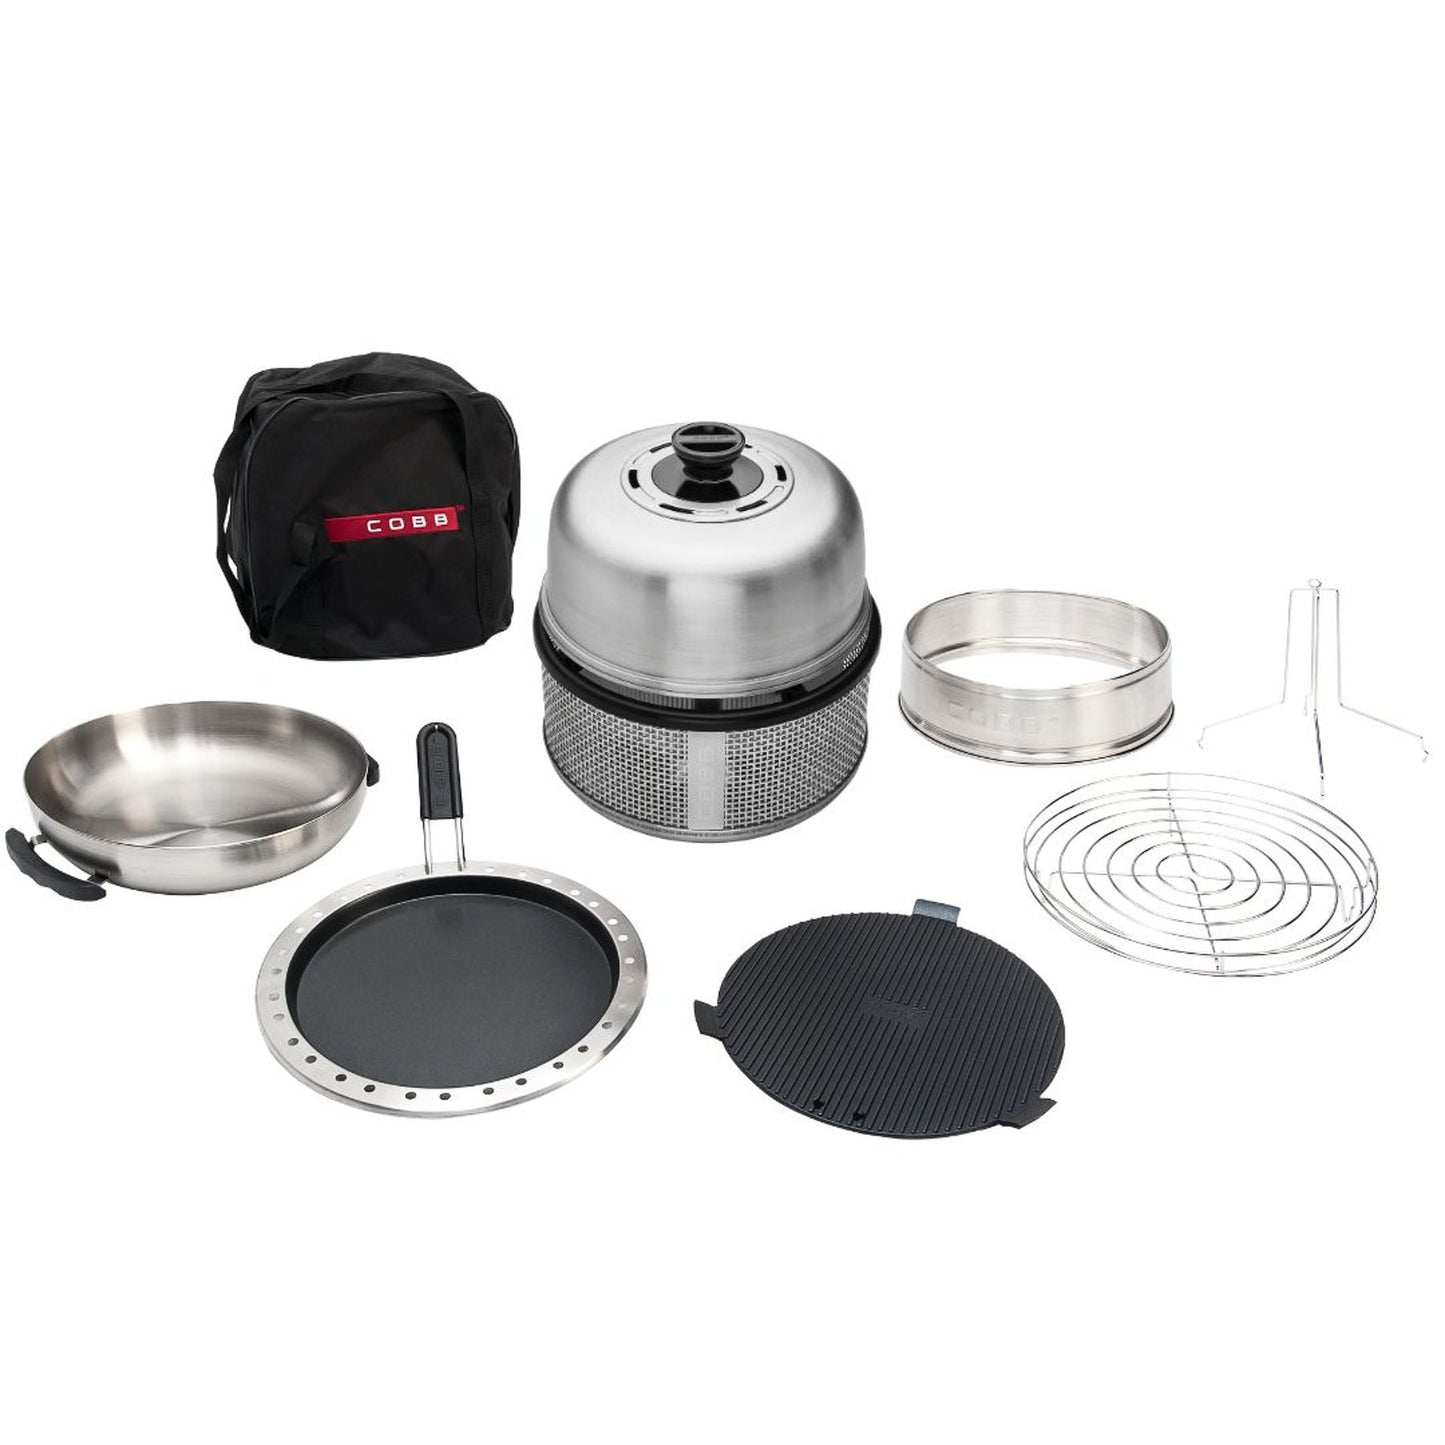 COBB Air Kitchen In A Box Combo (Charcoal)